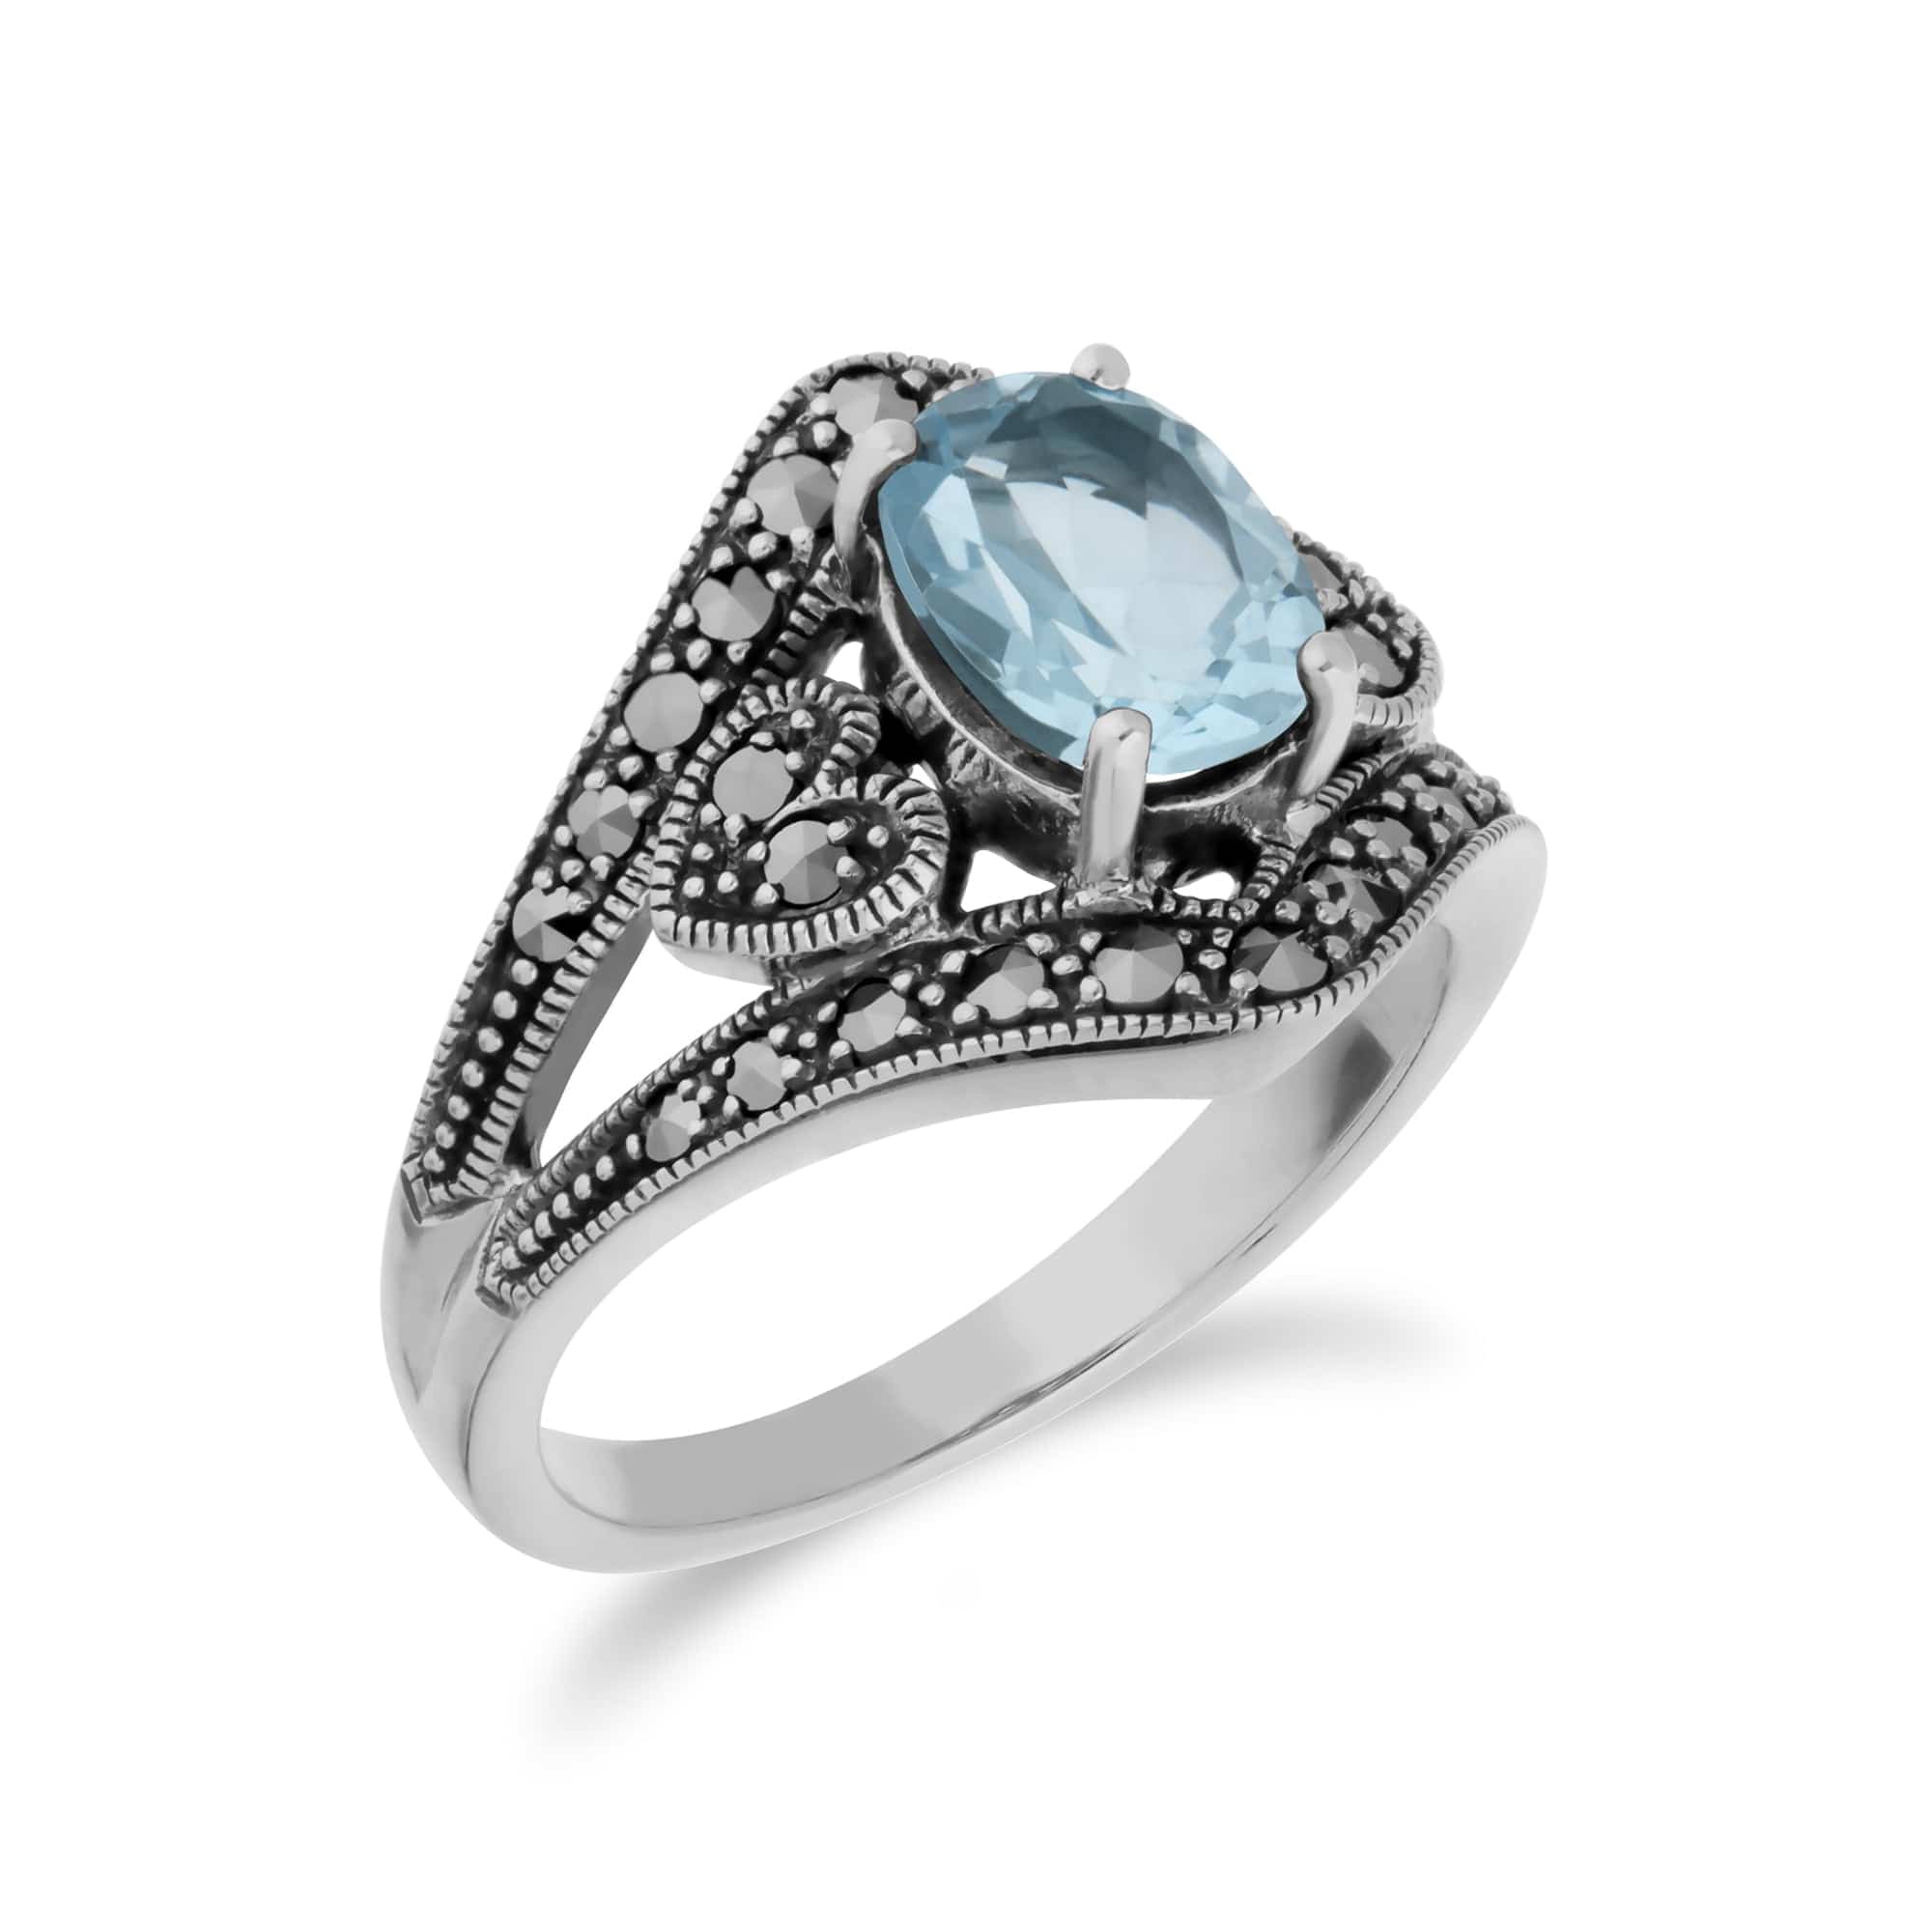 214R404903925 Art Deco Style Oval Blue Topaz & Marcasite in 925 Sterling Silver 2